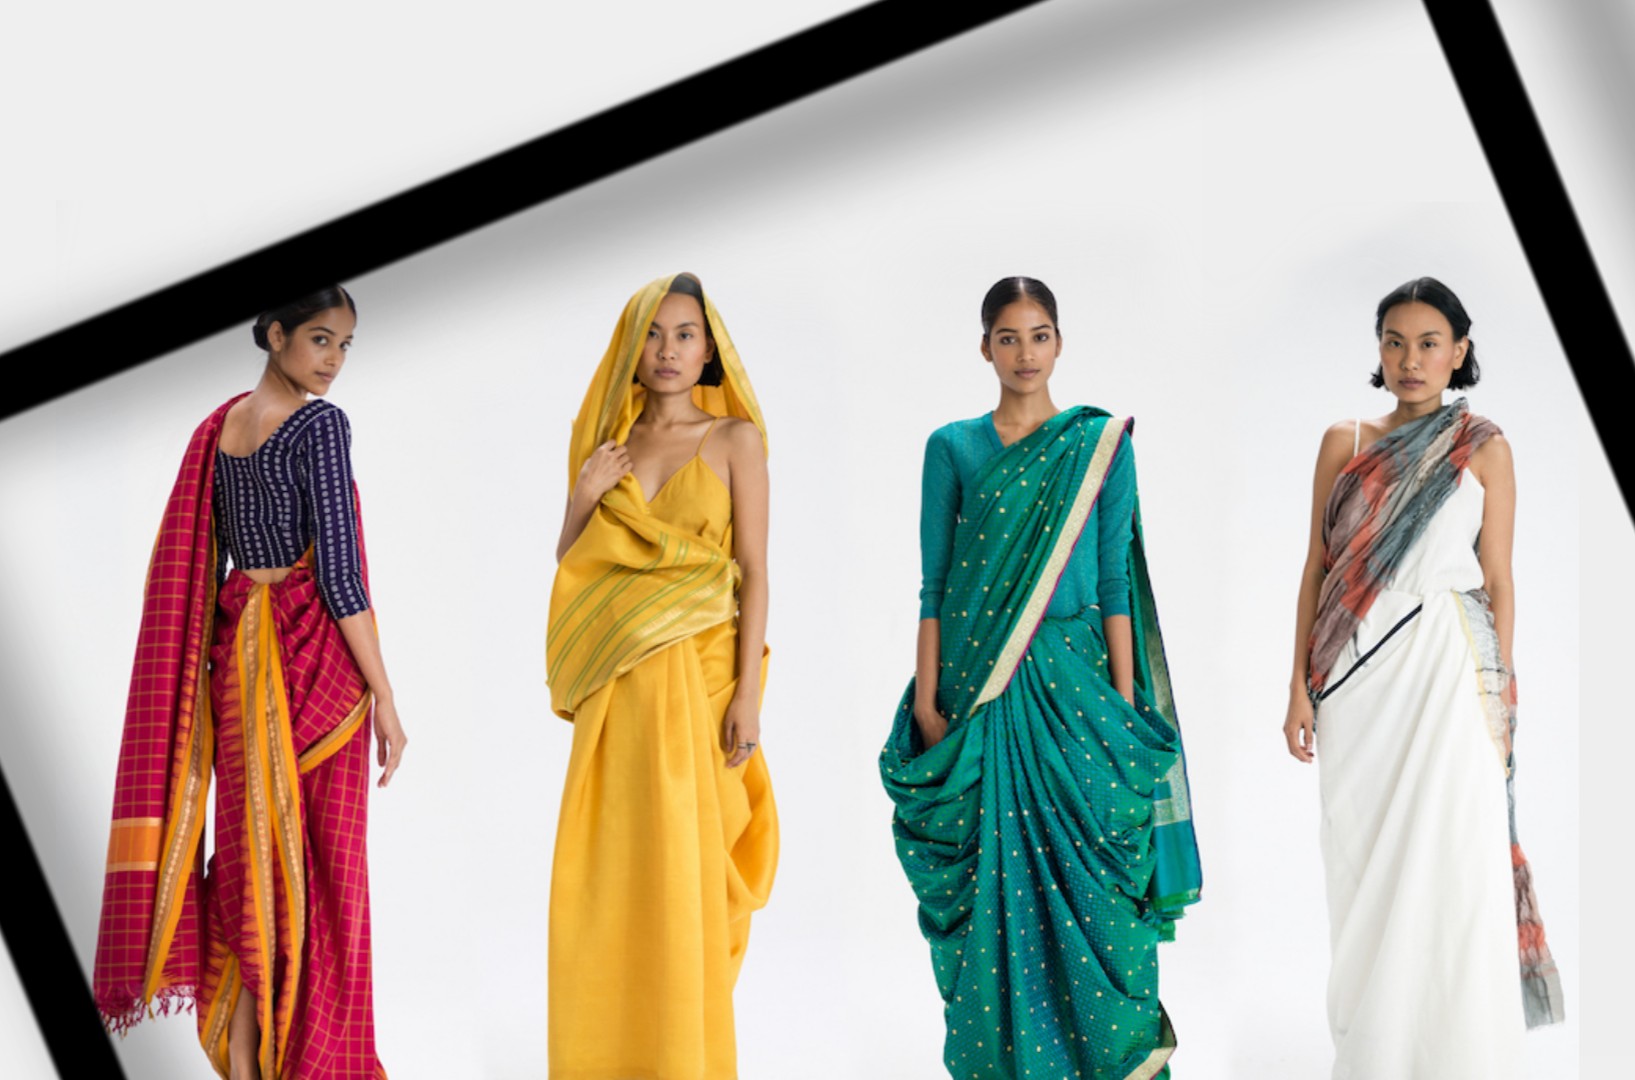 Types of saree draping styles or types of saree looks with names